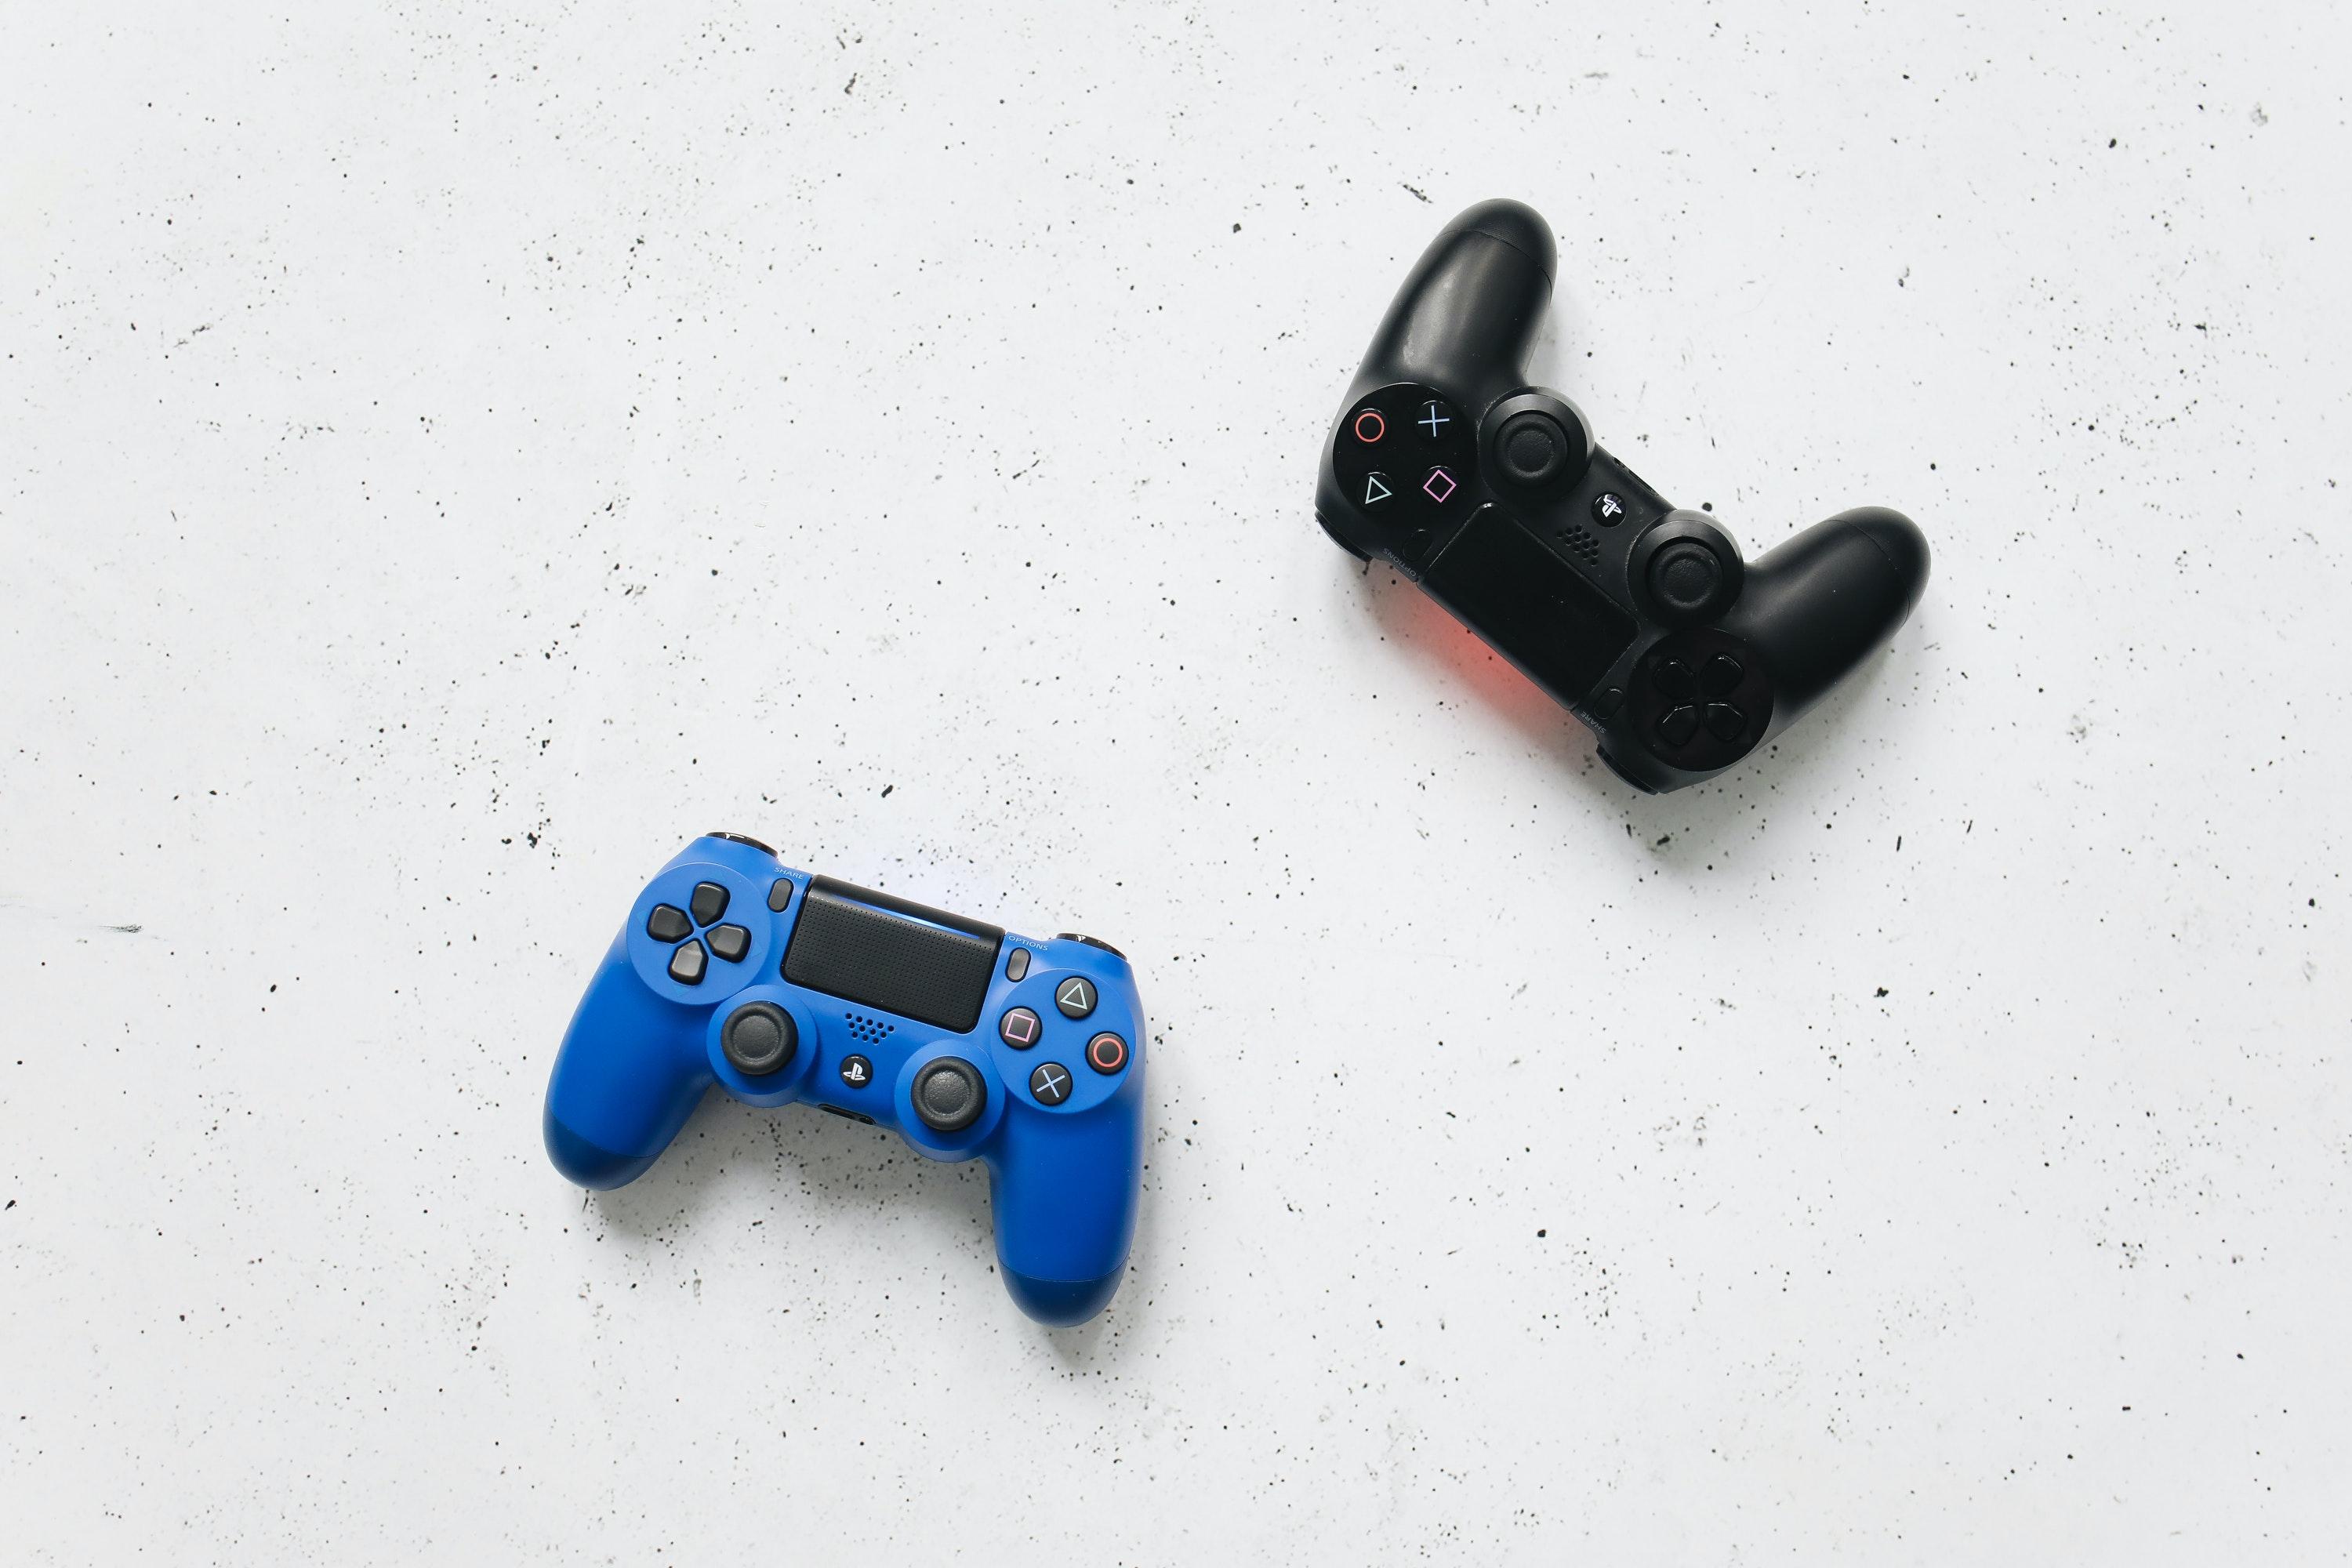 How do I know if my DUALSHOCK 4 is V1 or V2?